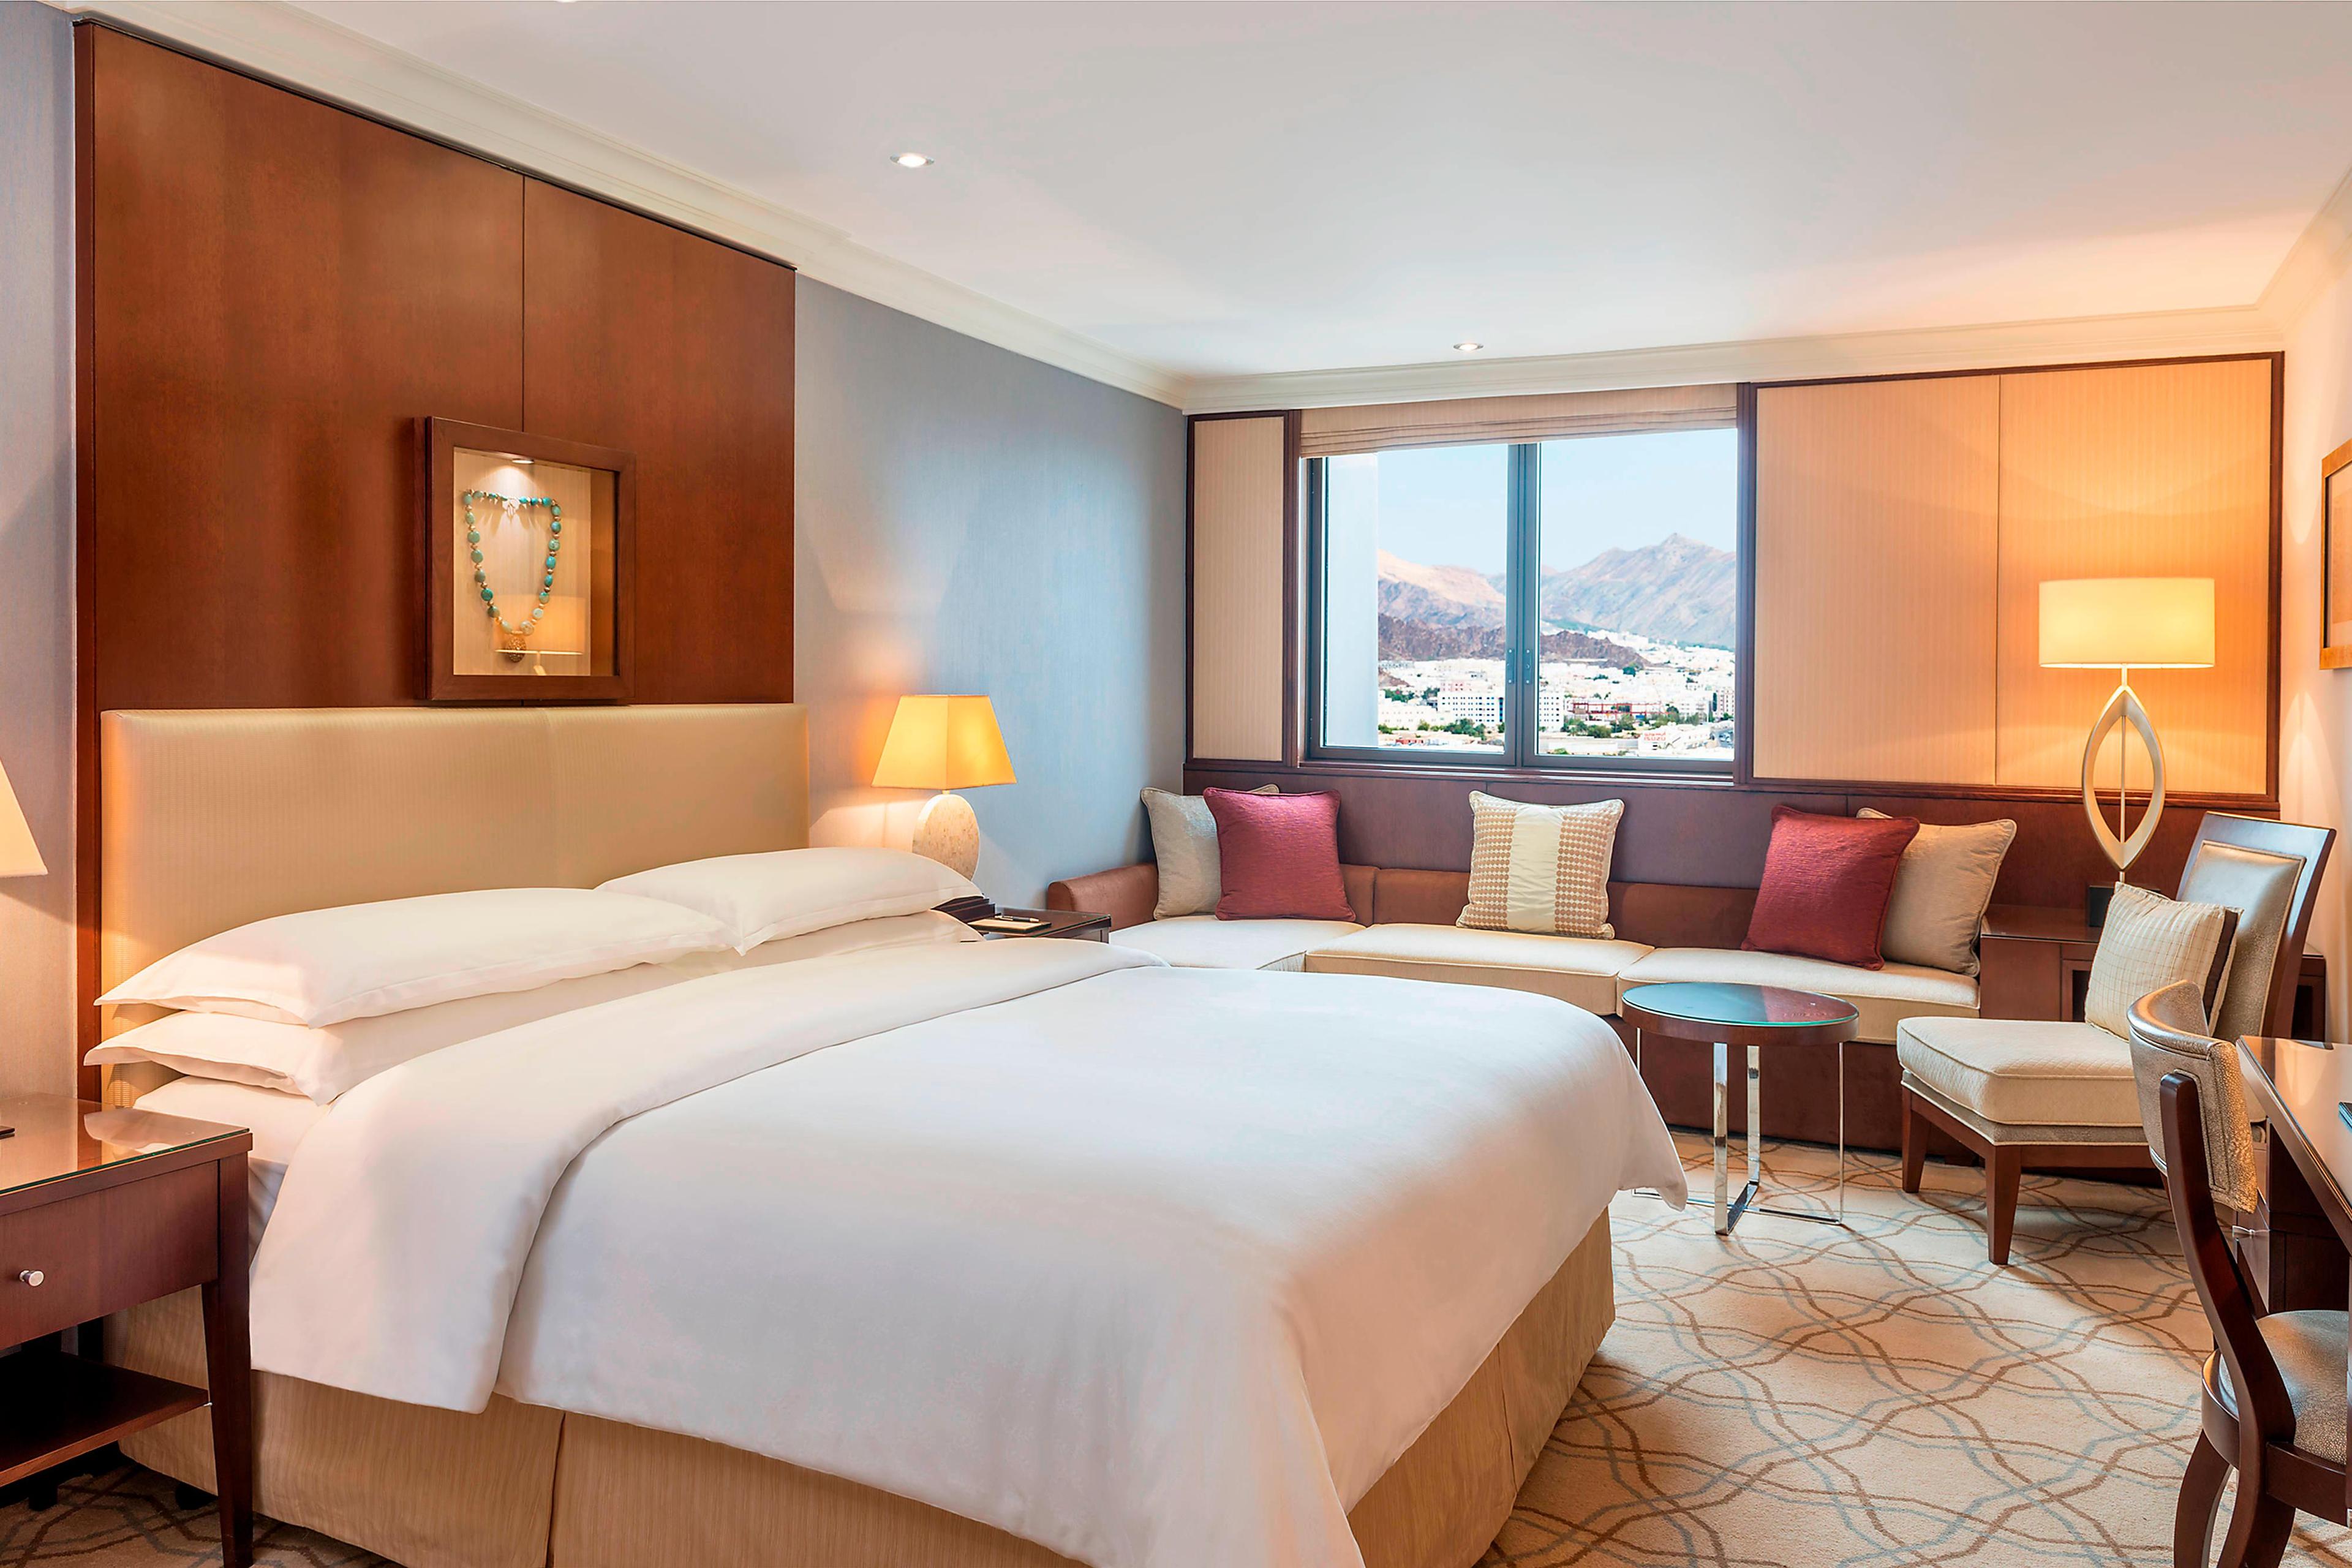 Whether you're traveling to Muscat for business or leisure, we are sure you will get the rest you need in our world-famous king Sheraton Signature Bed with a plush duvet and fluffy pillows.